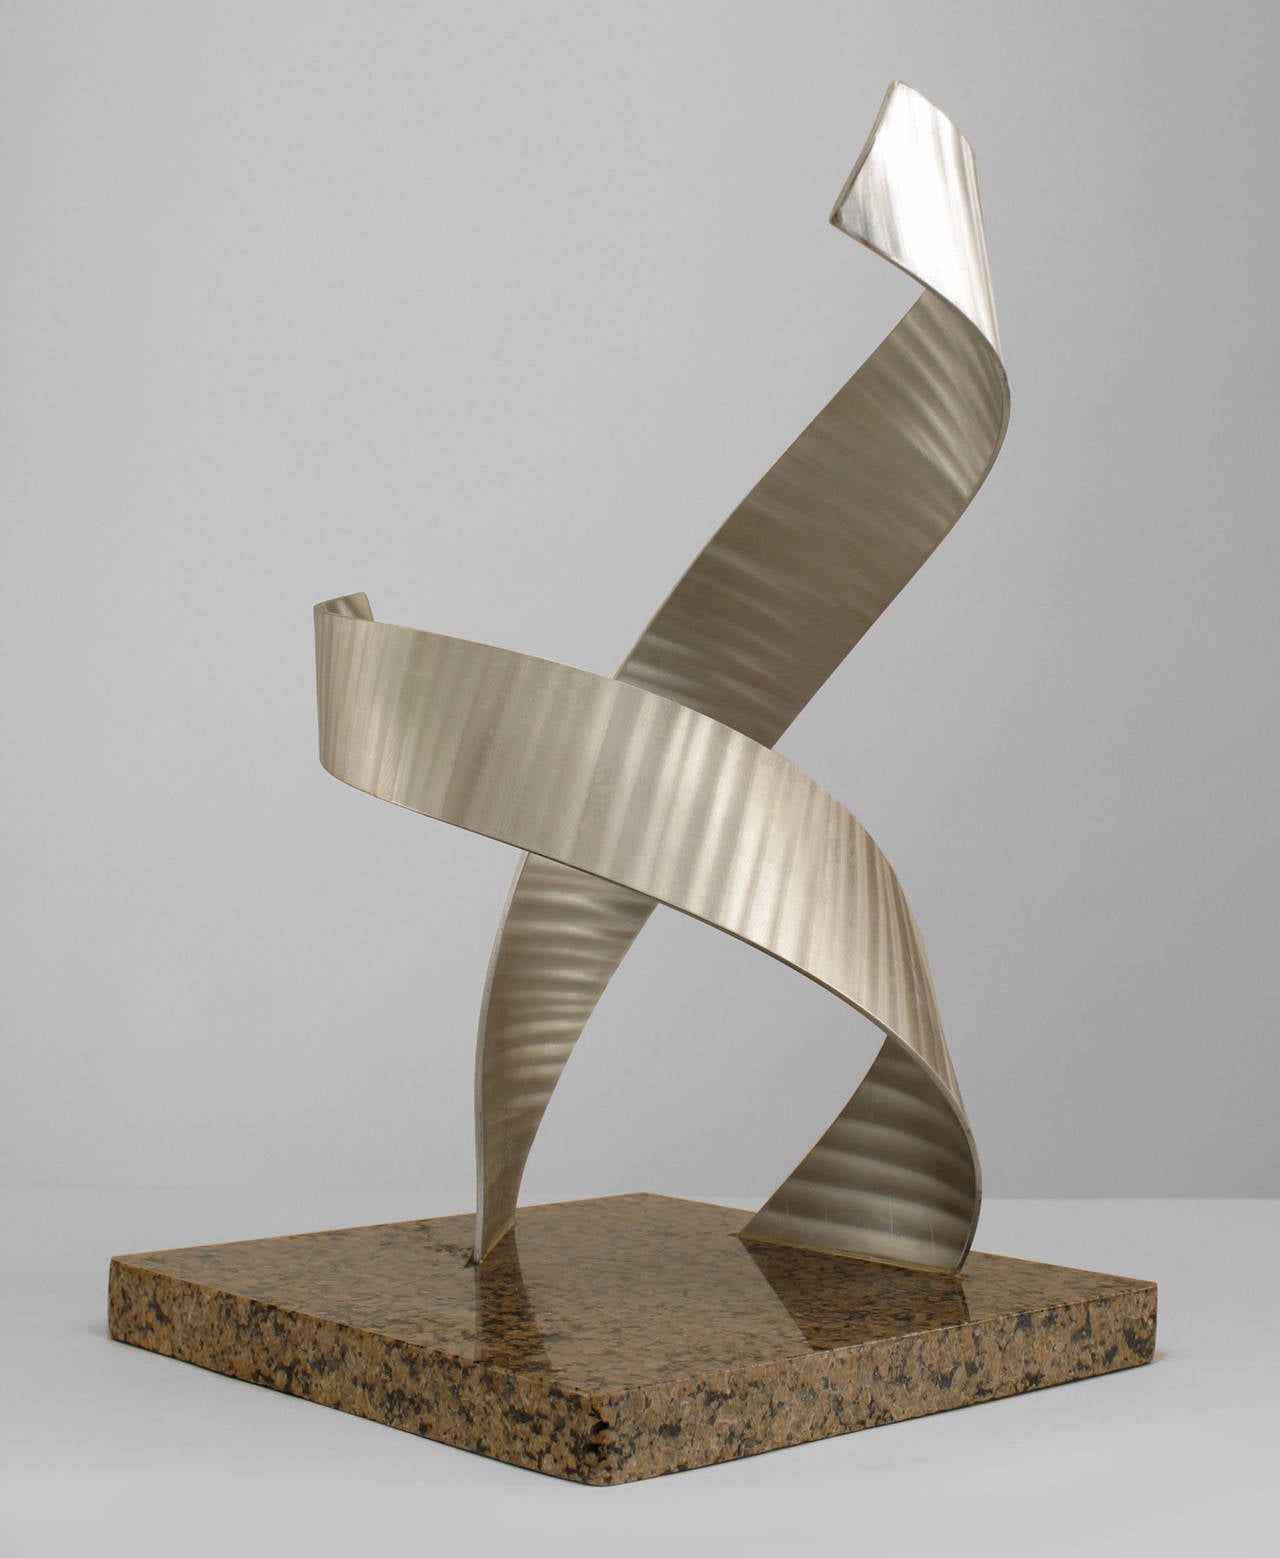 Contemporary American sculpture of two abstract, intertwined aluminum scroll
forms rising from a granite base.